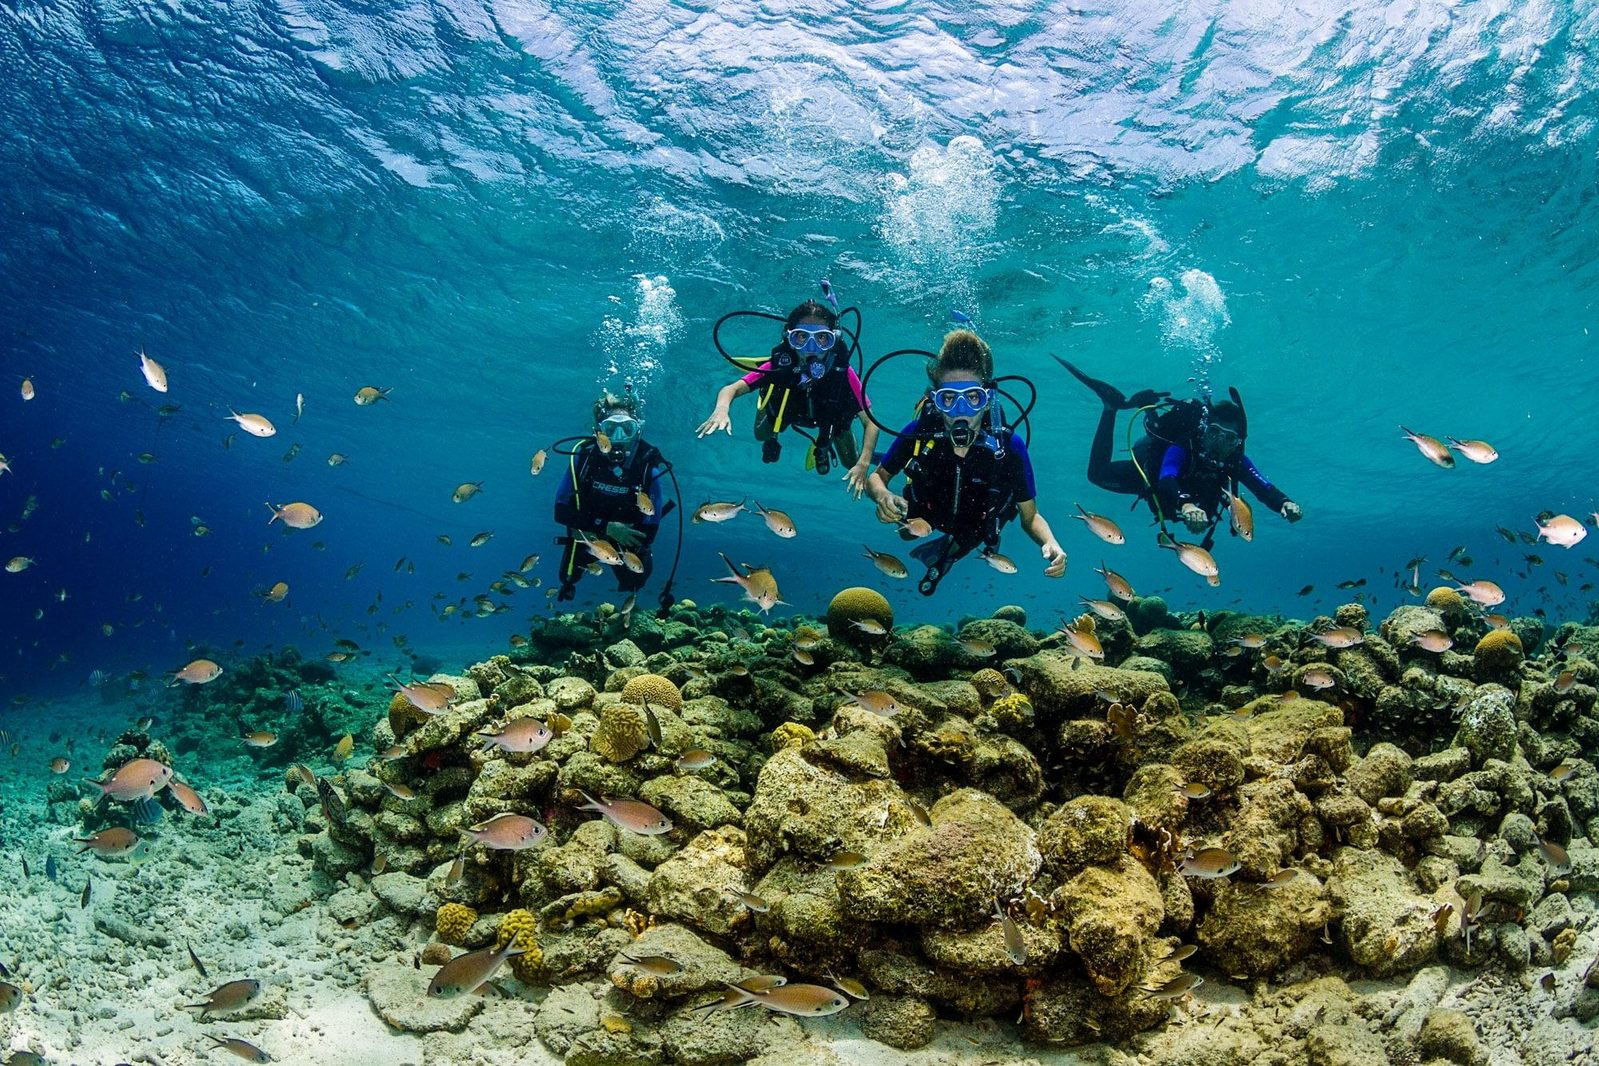 Read more about diving and snorkelling on Bonaire